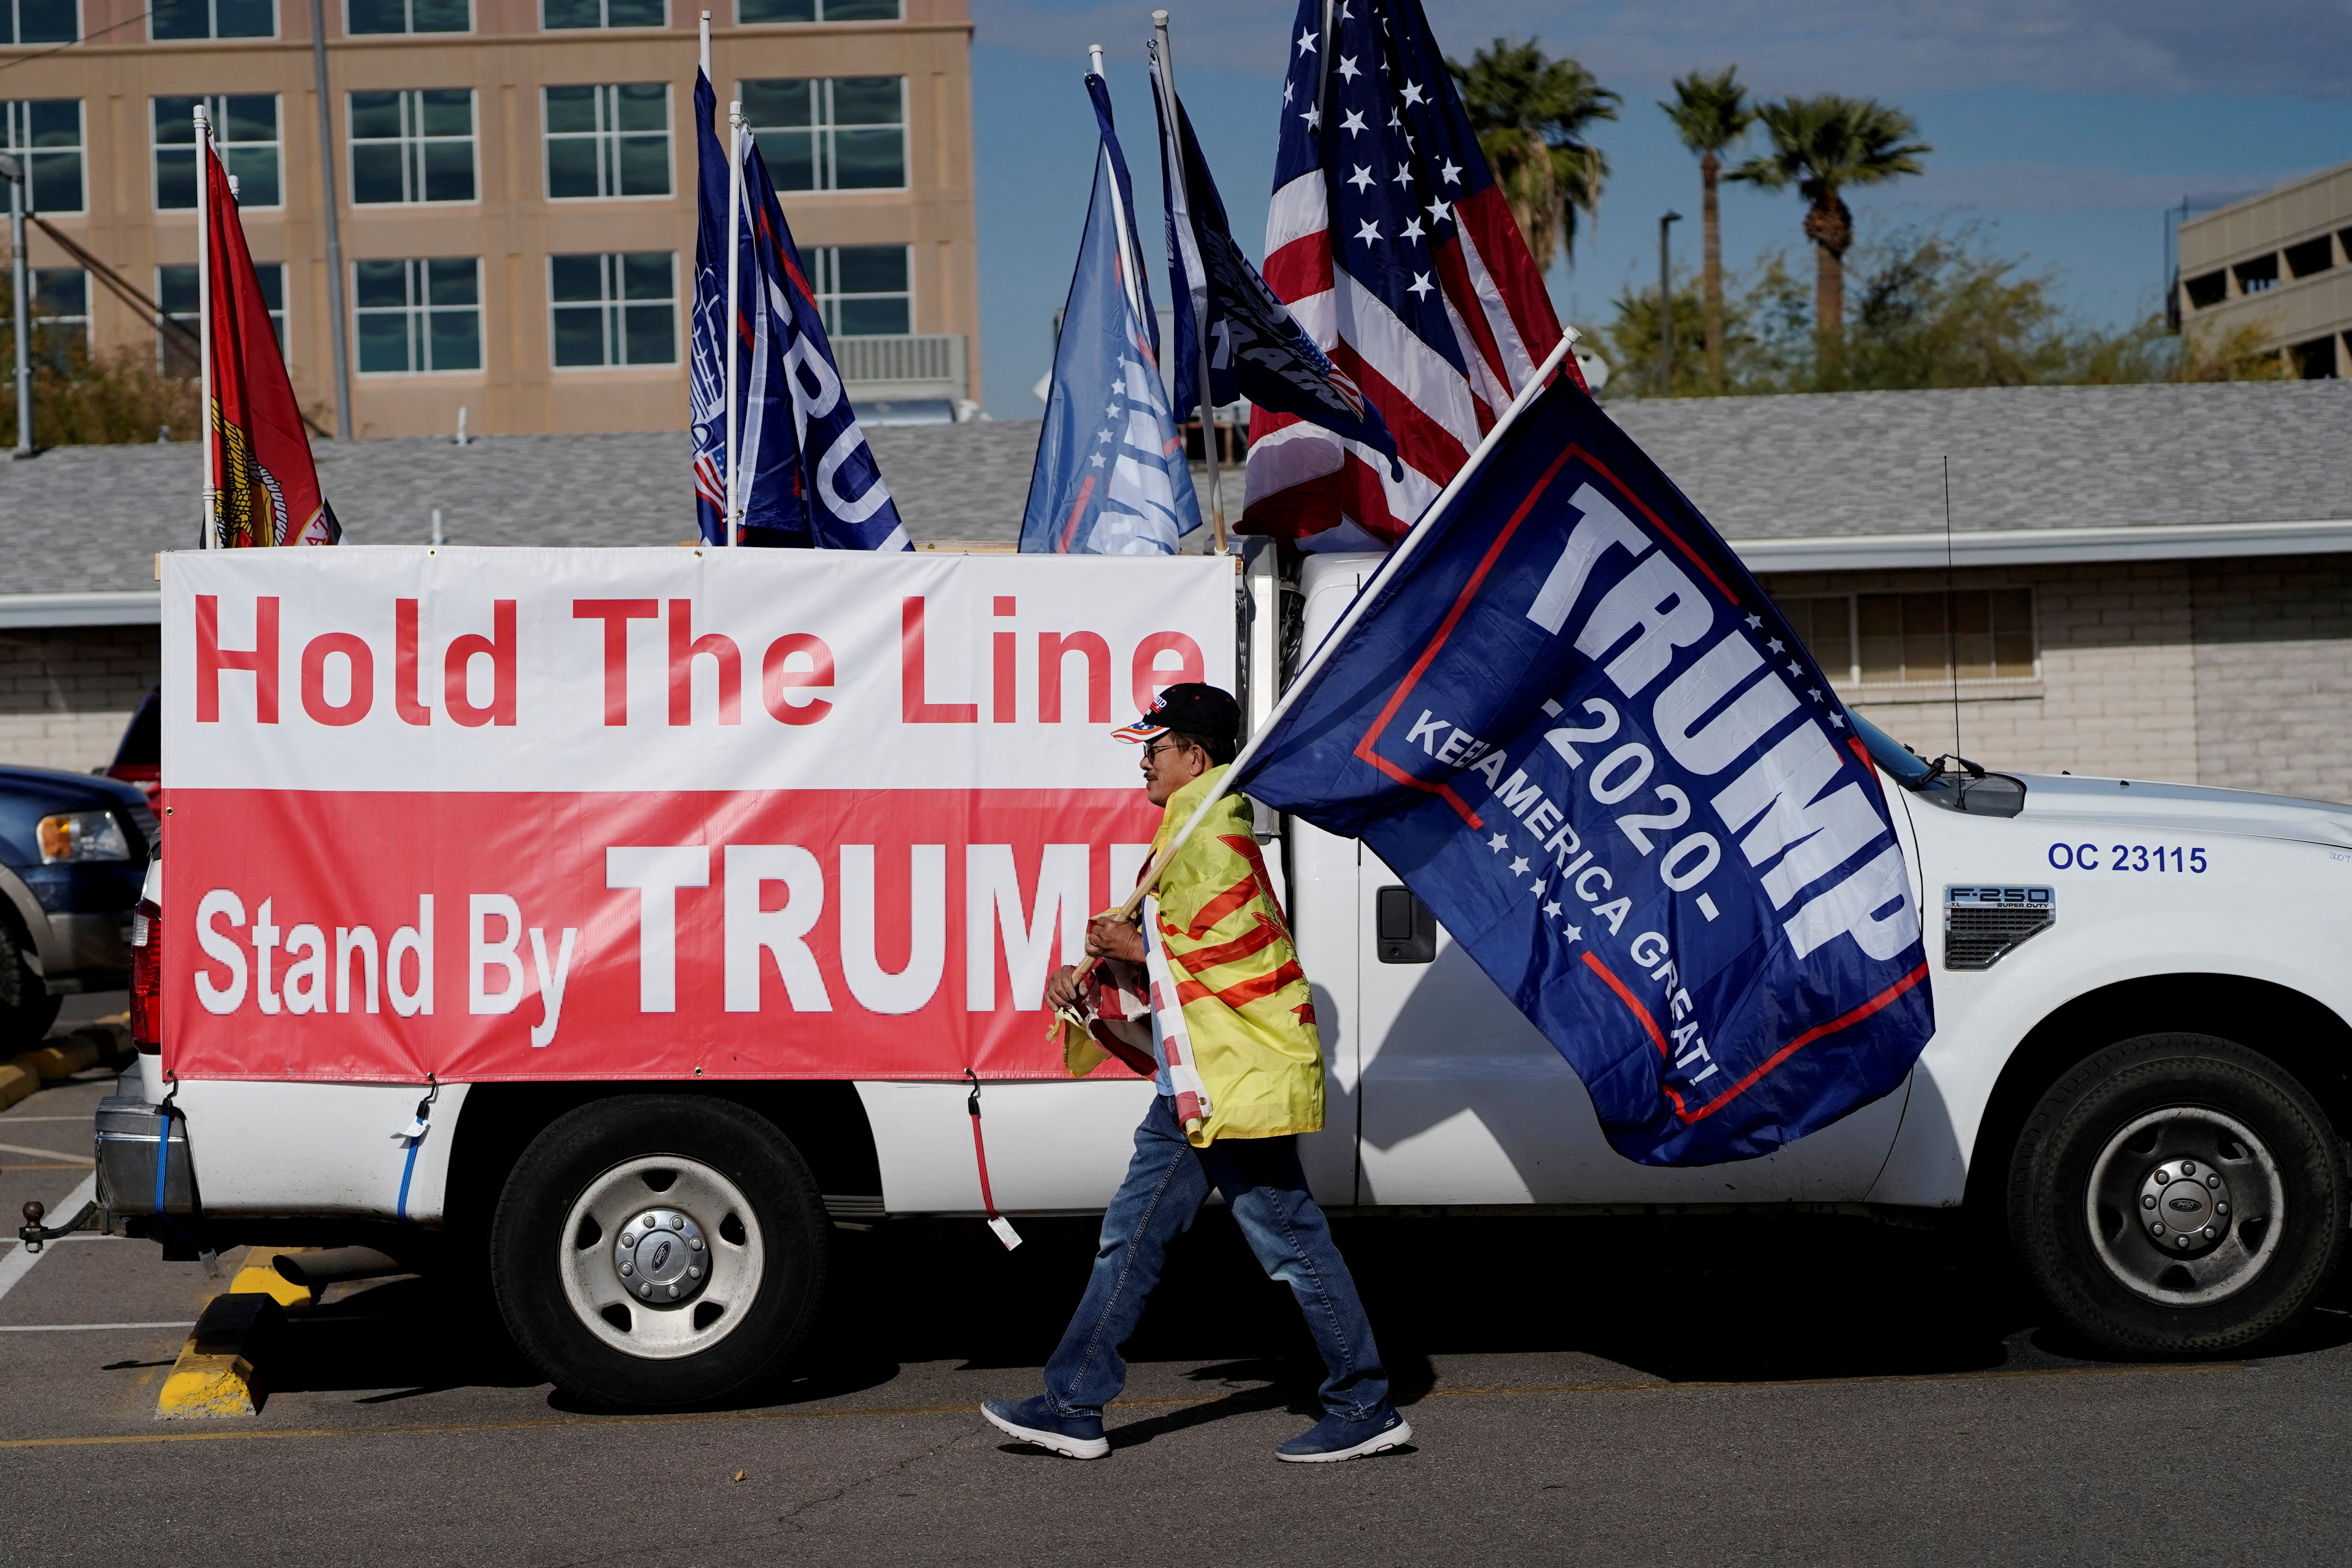 A protestor caries a "Trump 2020" flag as Arizona electors gather to cast their votes for the U.S. presidential election in Phoenix